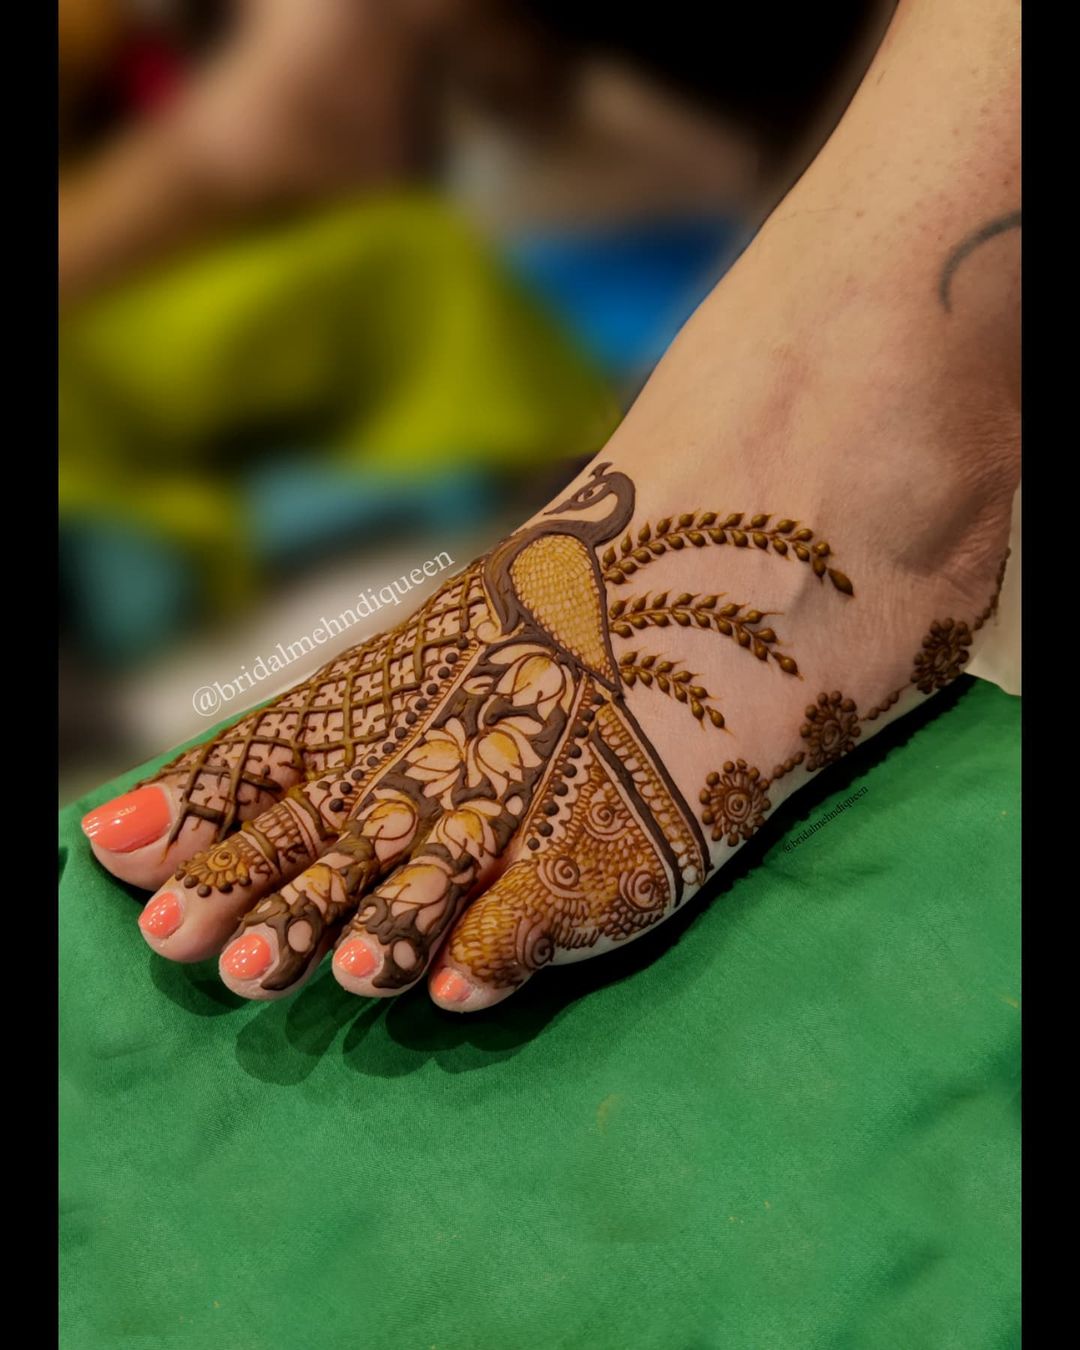 30 Mind Blowing Leg And Foot Mehndi Designs For Brides!